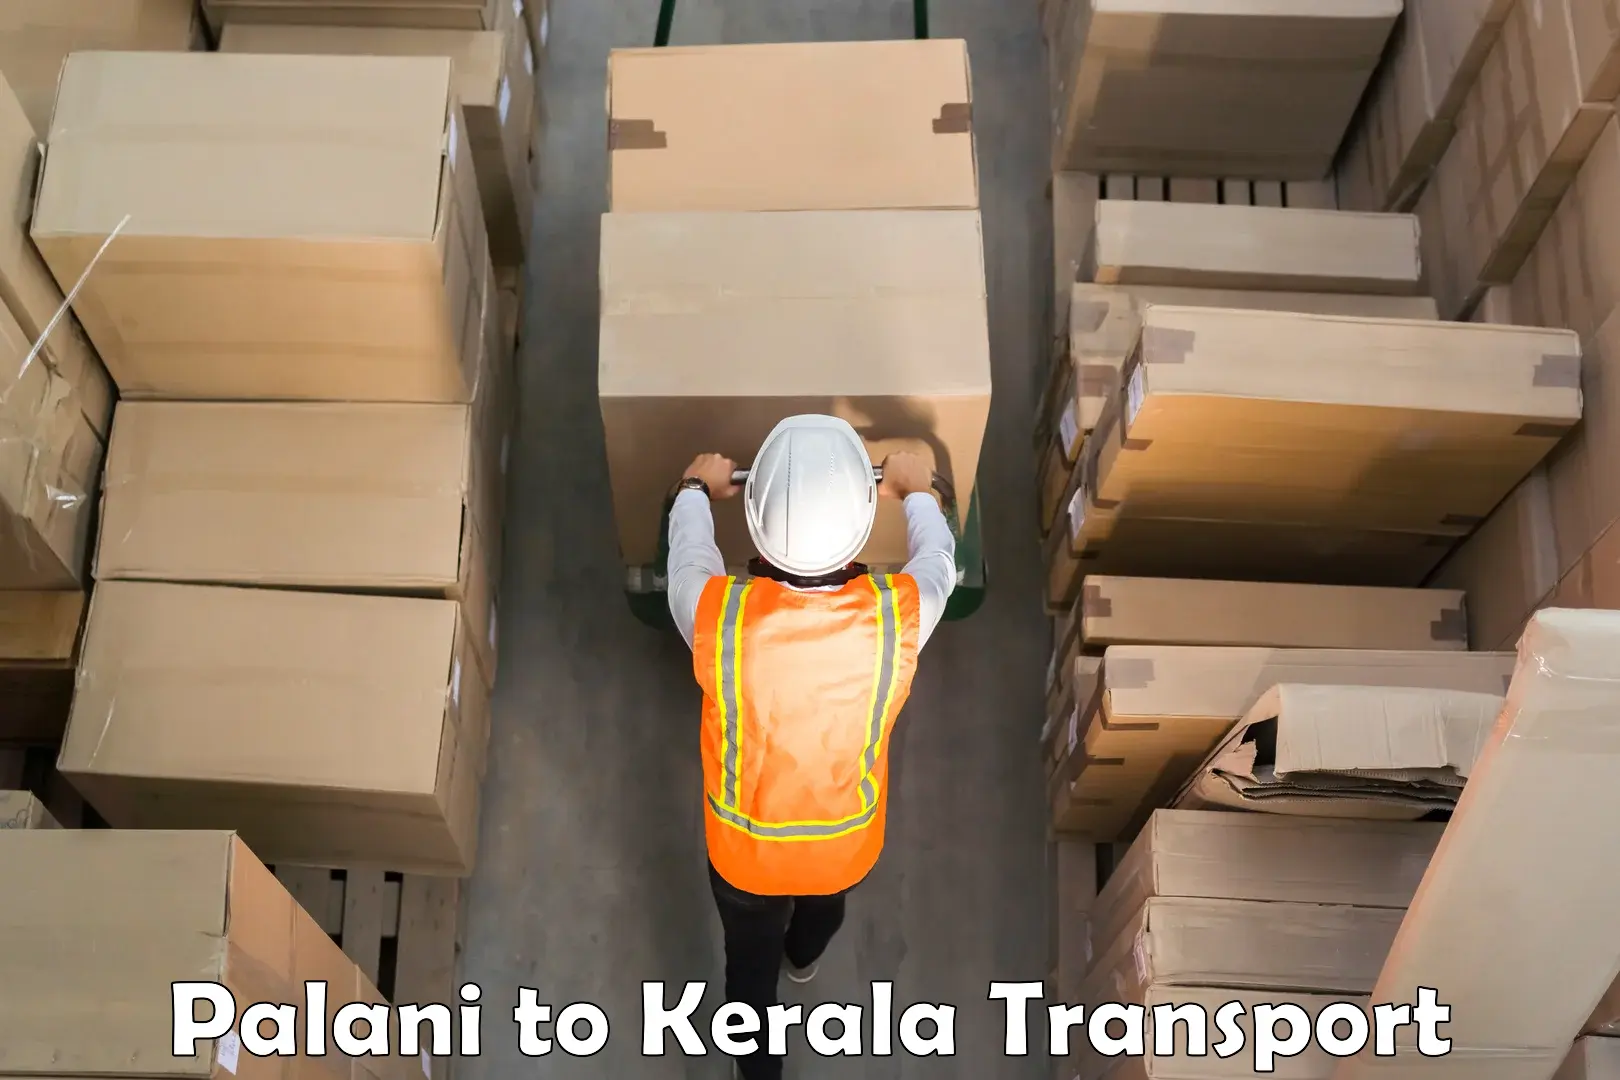 Goods delivery service Palani to Kerala